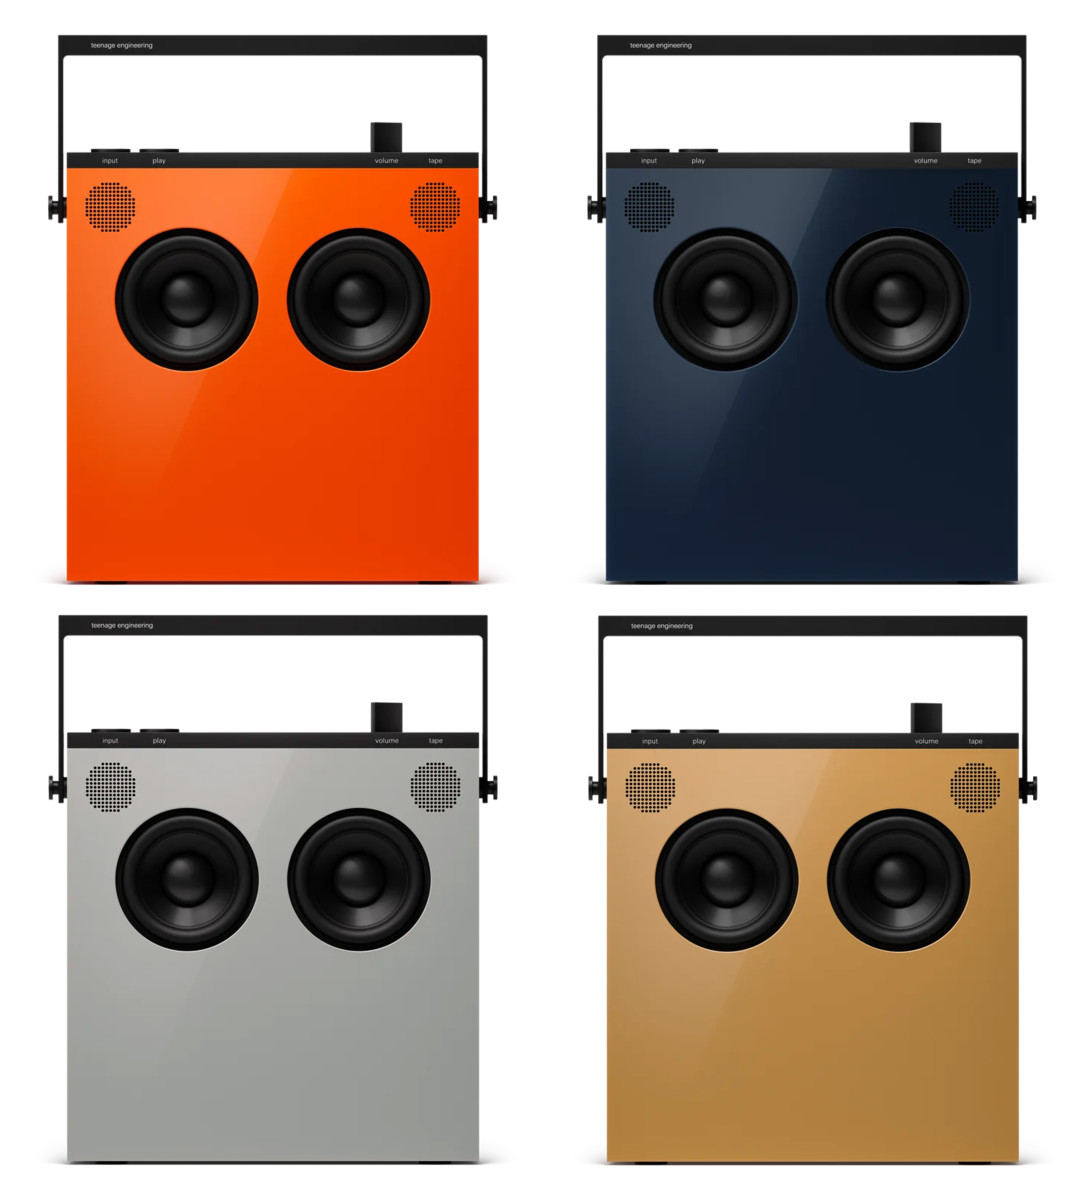 Teenage Engineering's OB-4 gets a new collection of colors - Acquire